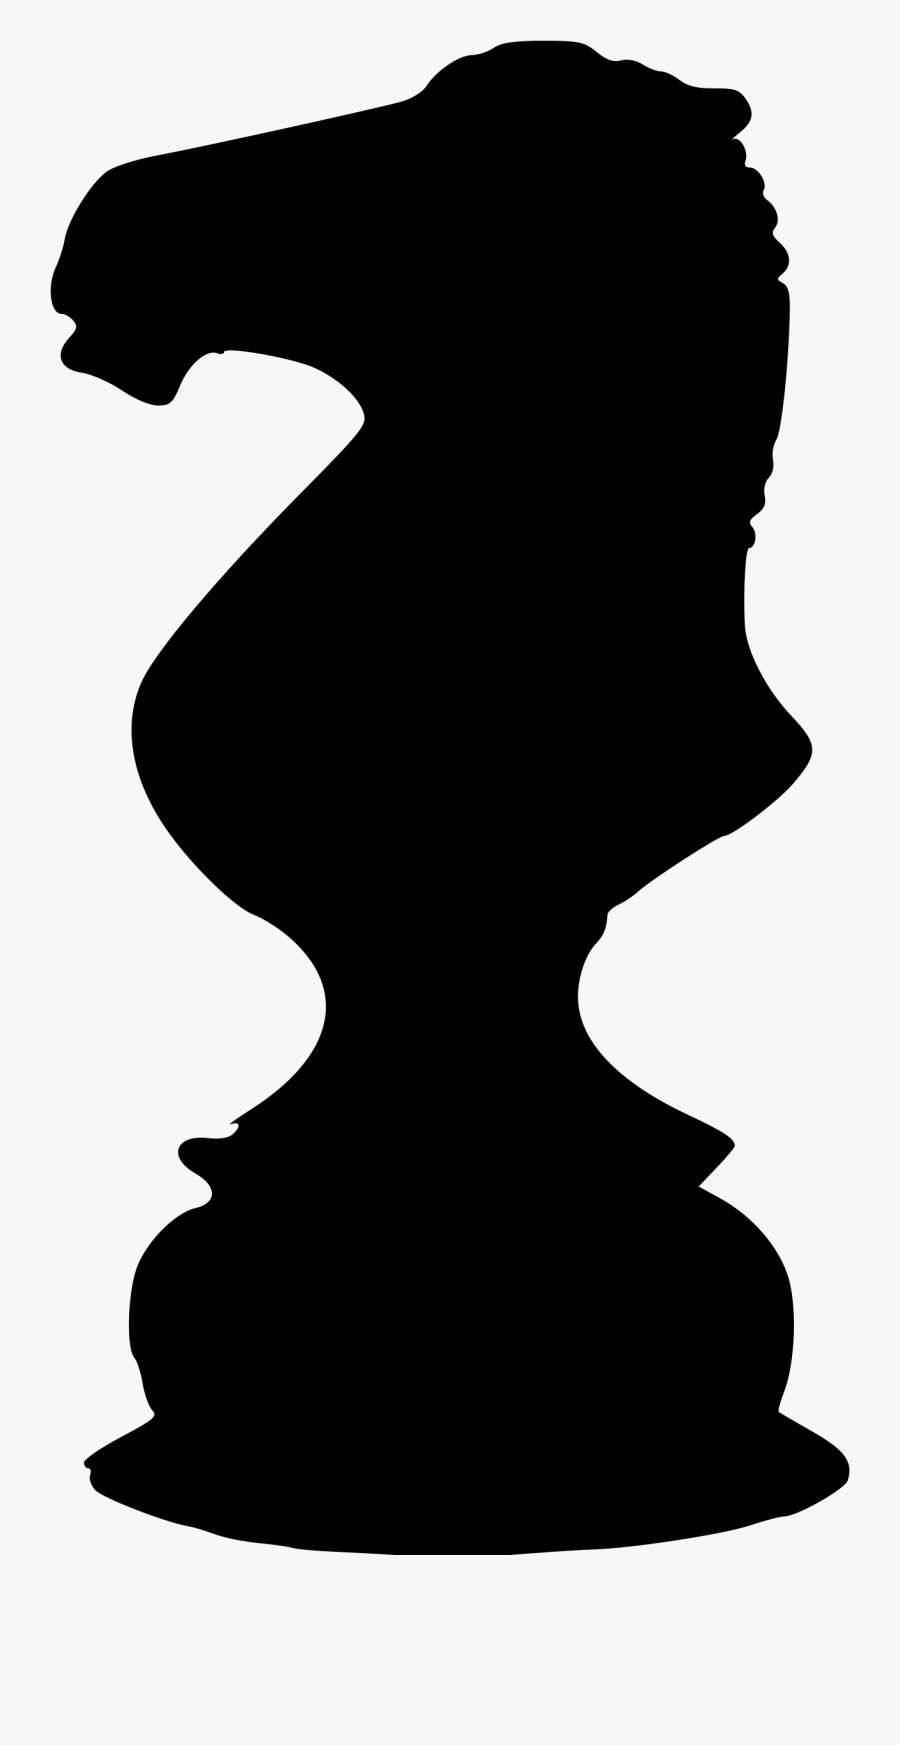 Knight Chess Piece - Knight Chess Piece Png, Transparent Clipart